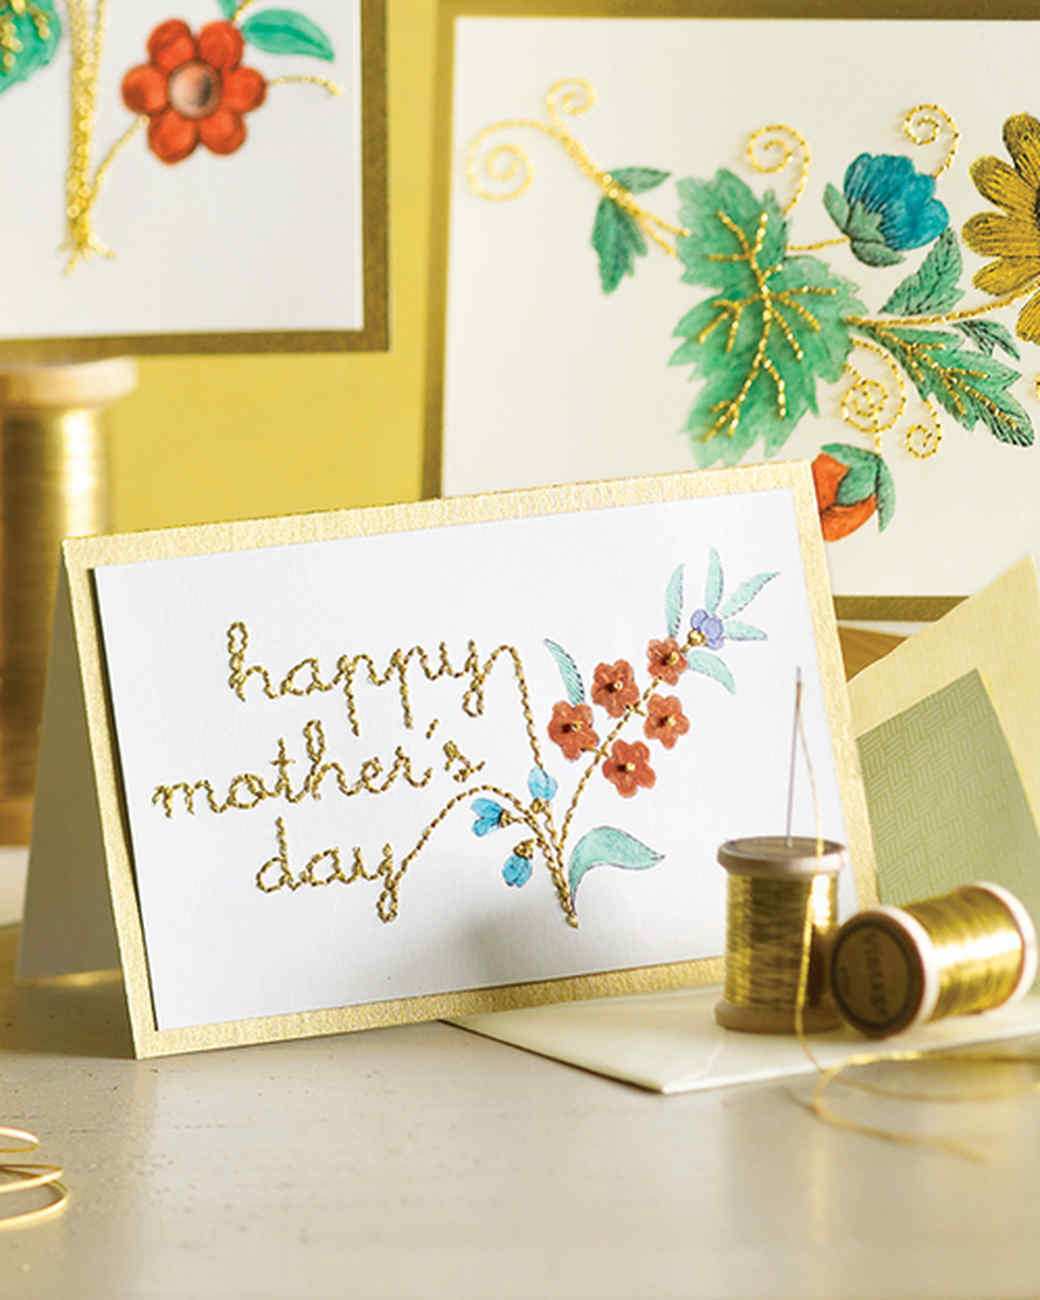 59 Blank Mother S Day Card Craft Template Photo by Mother S Day Card Craft Template